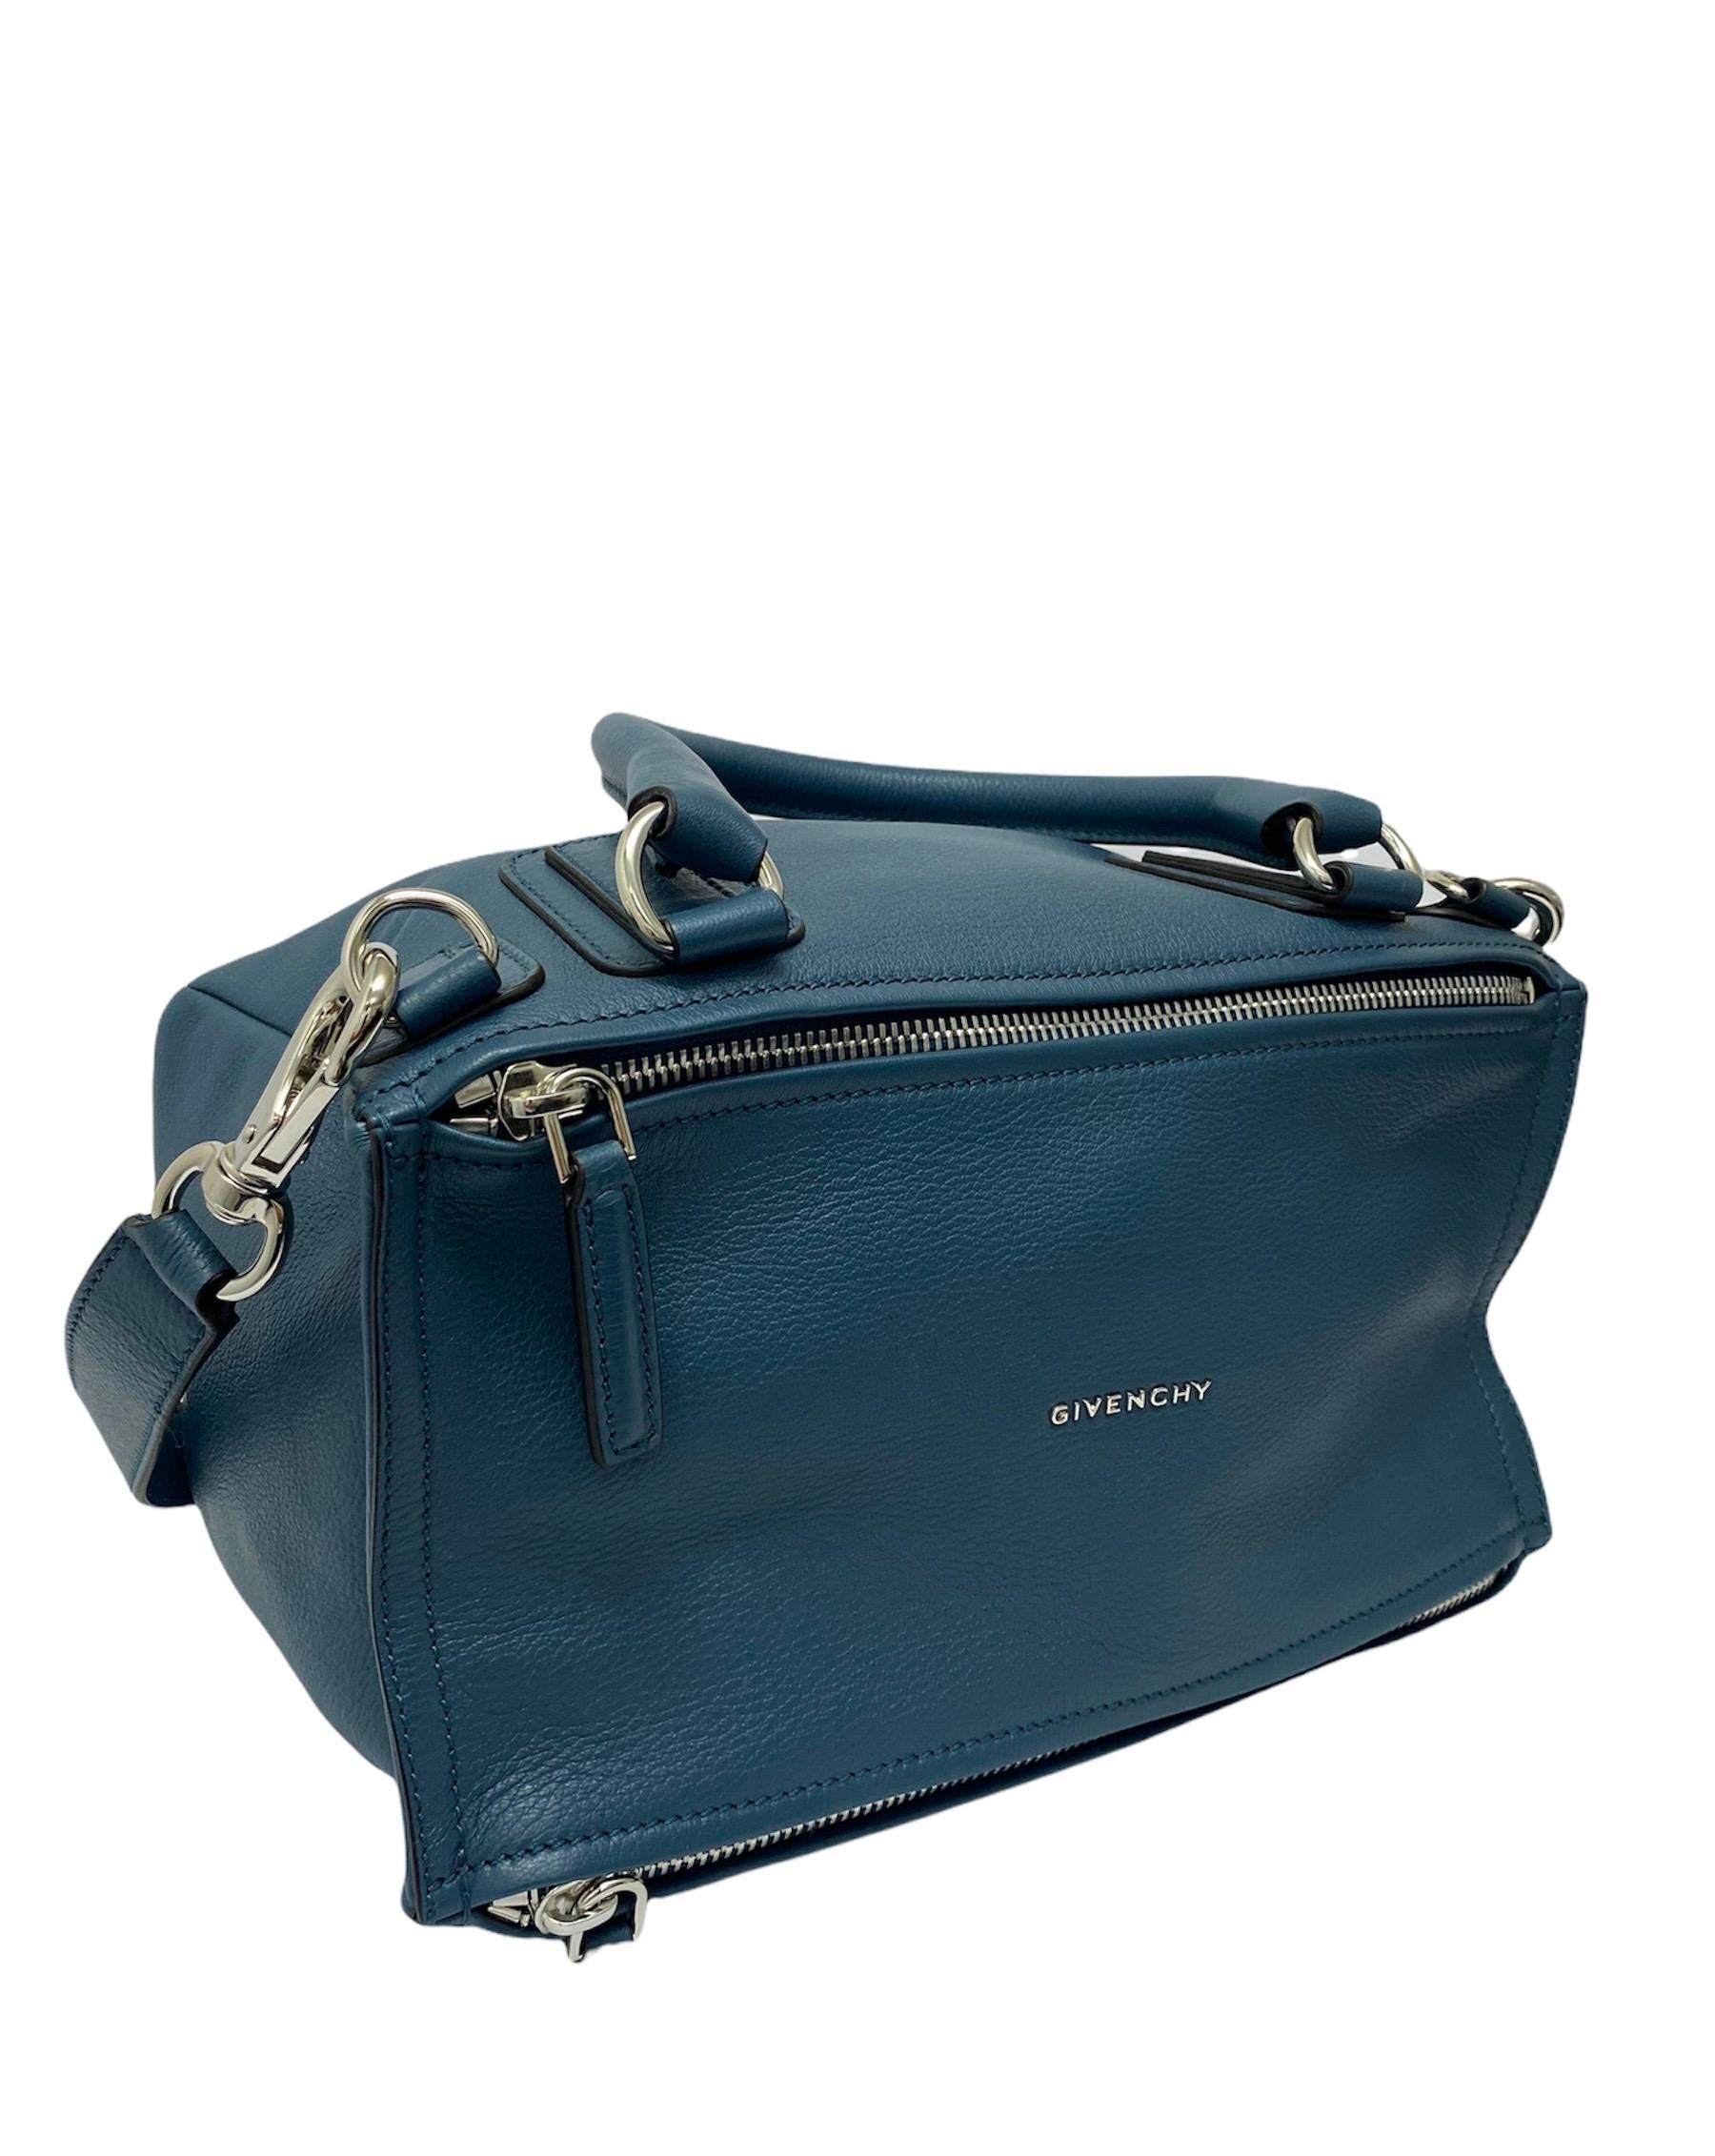 Givenchy Pandora model bag made of blue leather with silver hardware. Zip closure, very large inside. Equipped with handle and removable shoulder strap. The bag is in excellent condition.